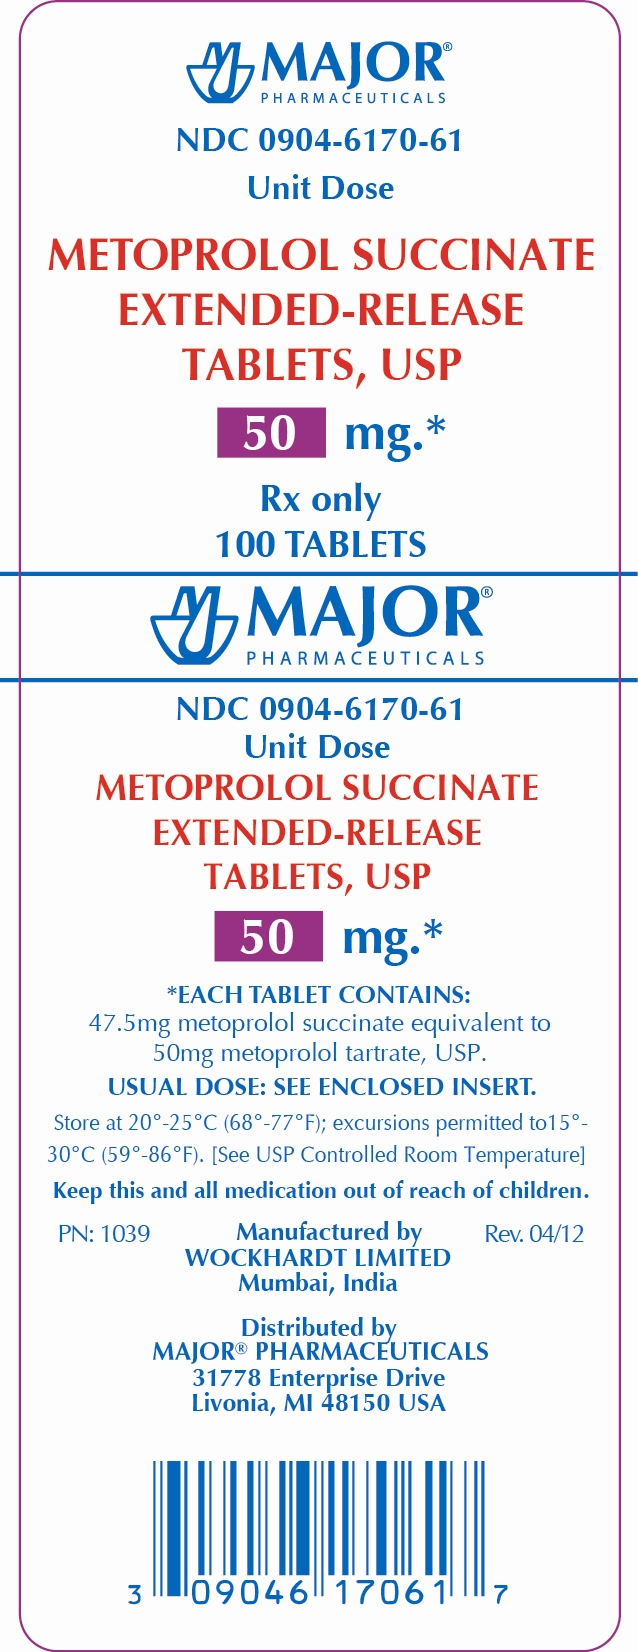 METOPROLOL SUCCINATE EXTENDED-RELEASE TABLETS, USP 50MG